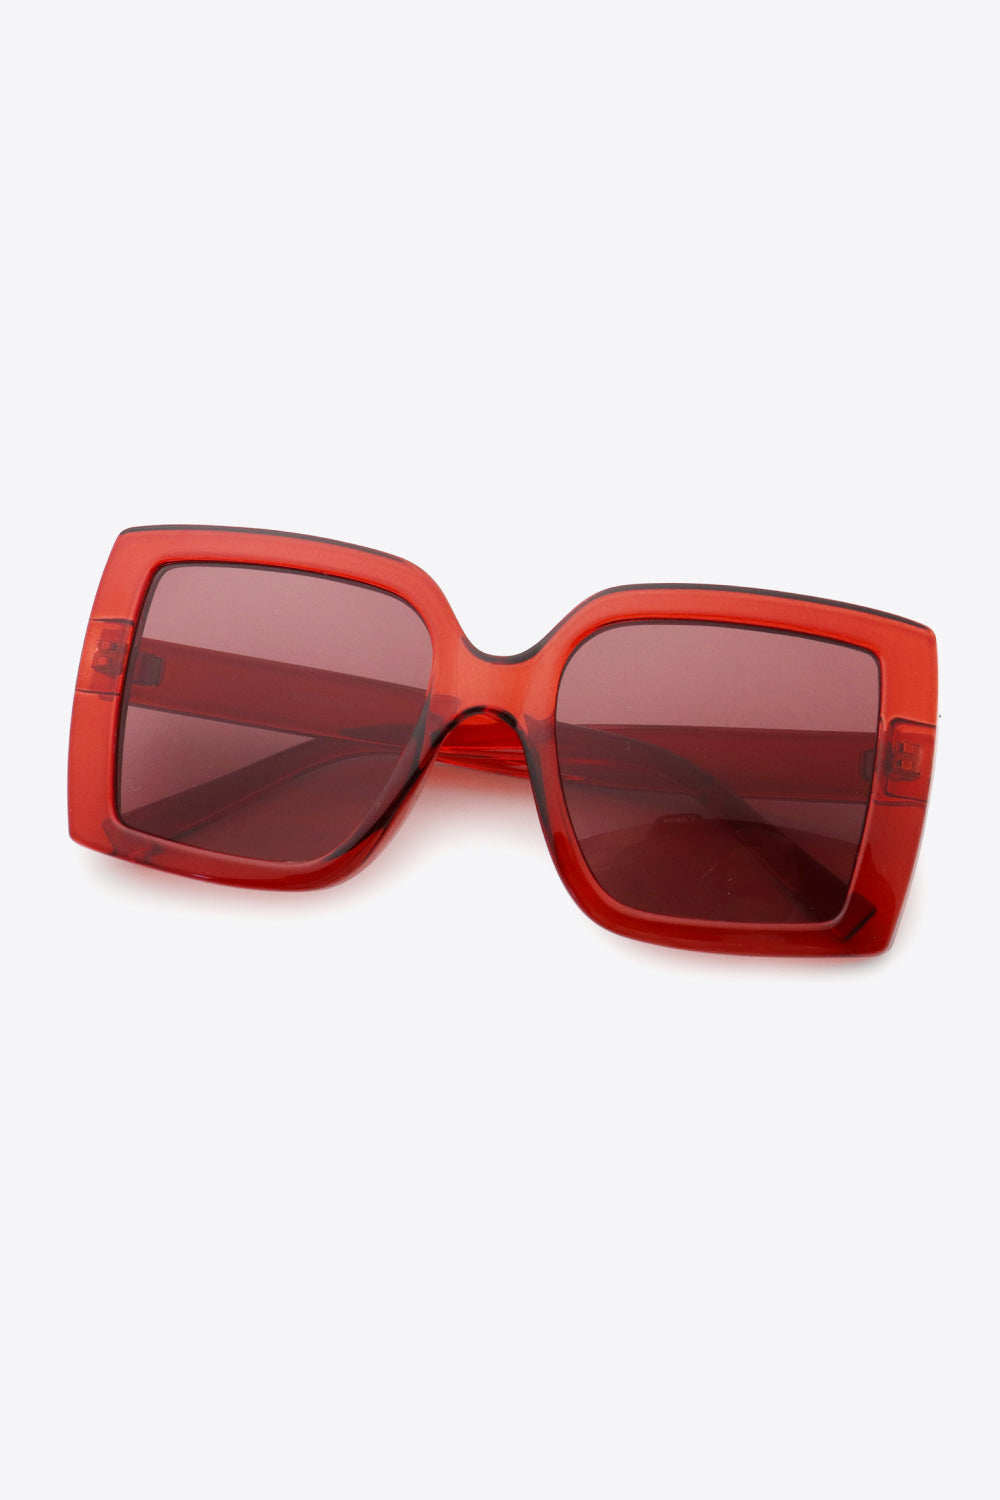 Acetate Lens Square Sunglasses Print on any thing USA/STOD clothes